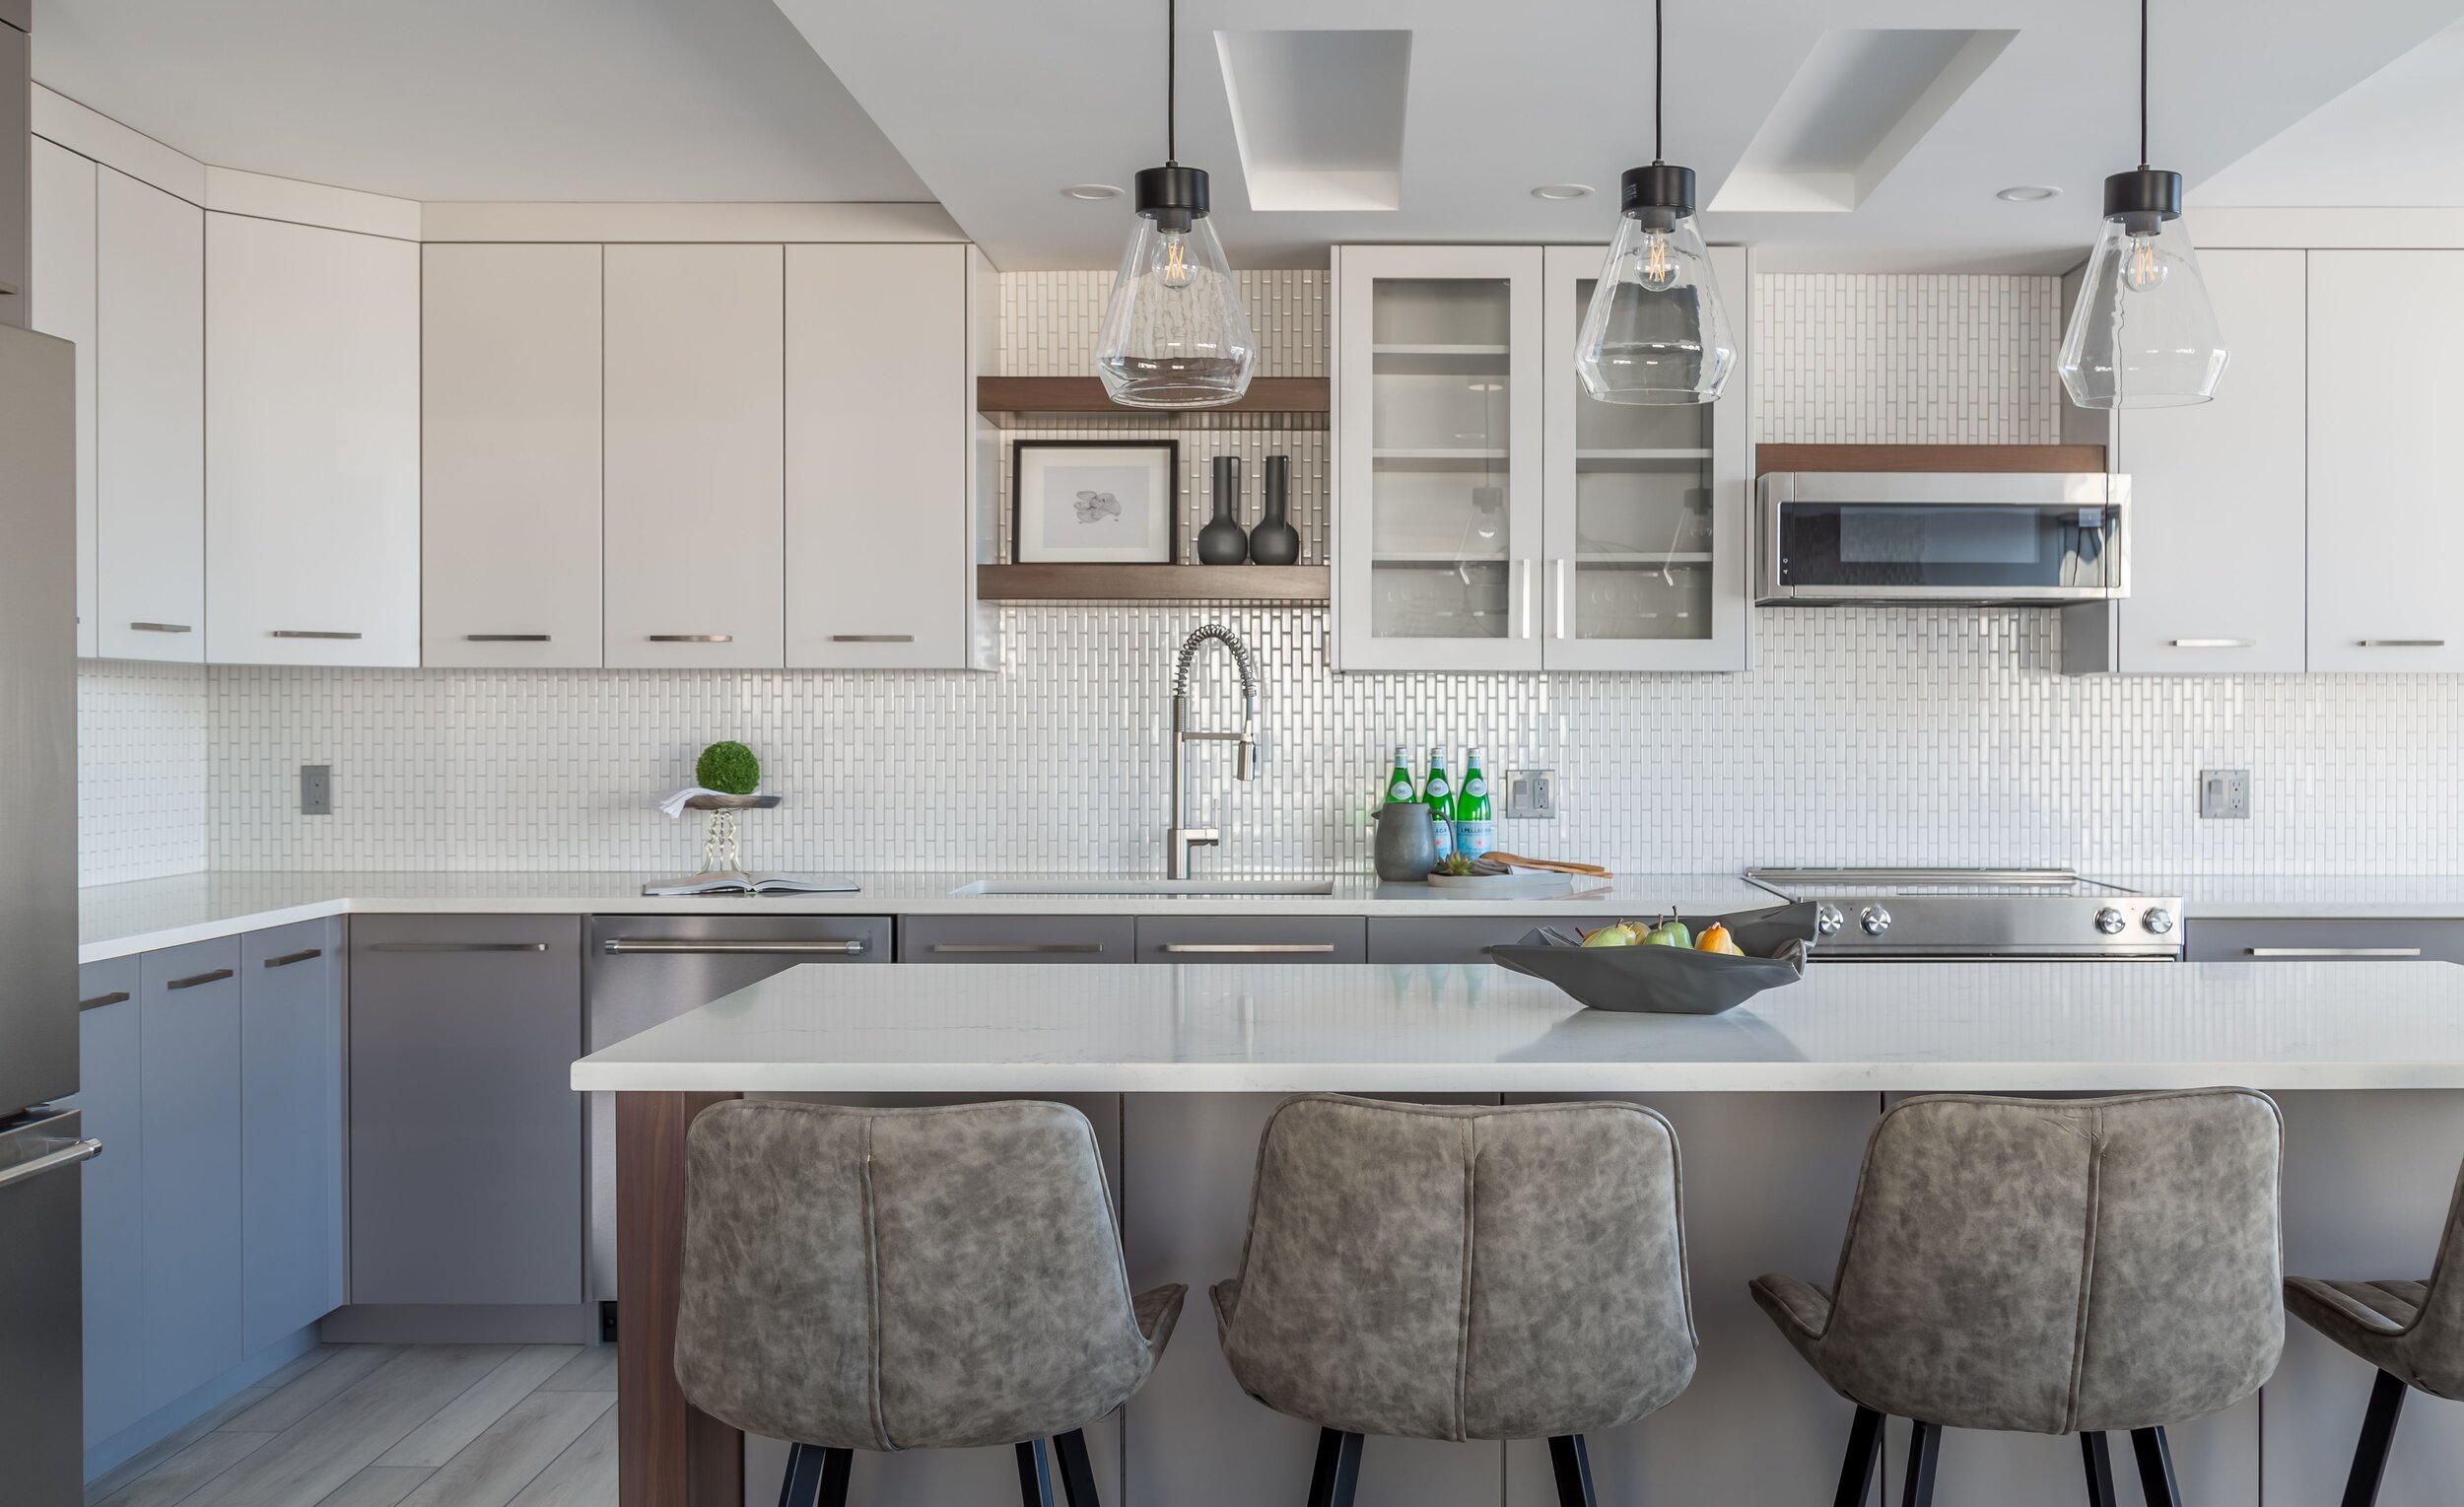 Calgary Kitchen Renovation in the community of Connaught